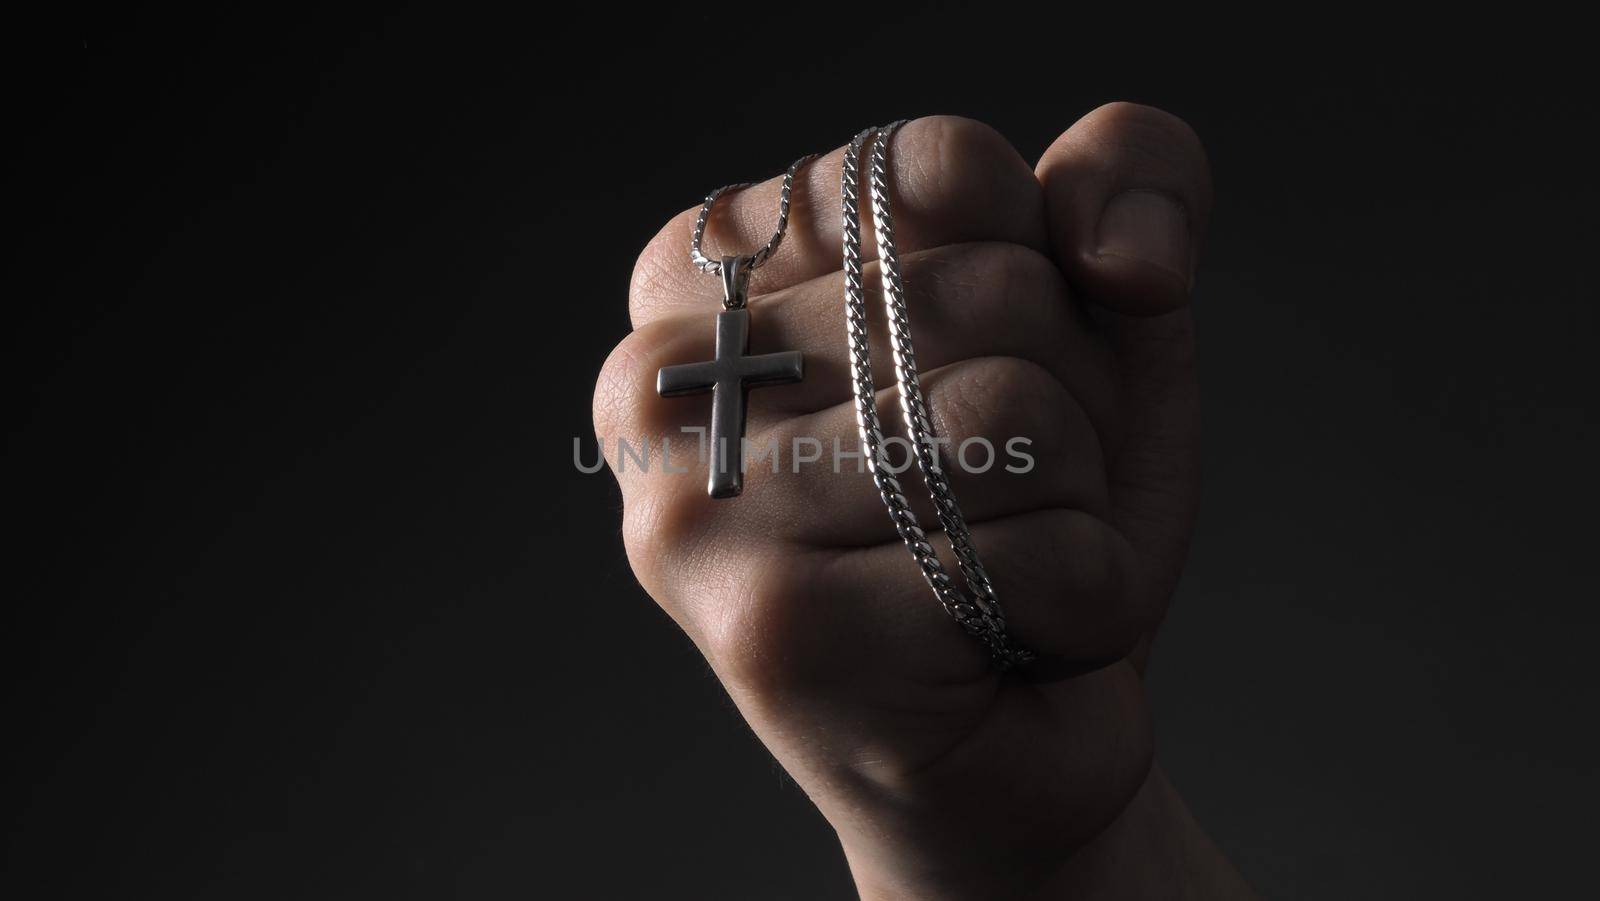 Cross or crucifix pendant and necklace in man hand  by gnepphoto